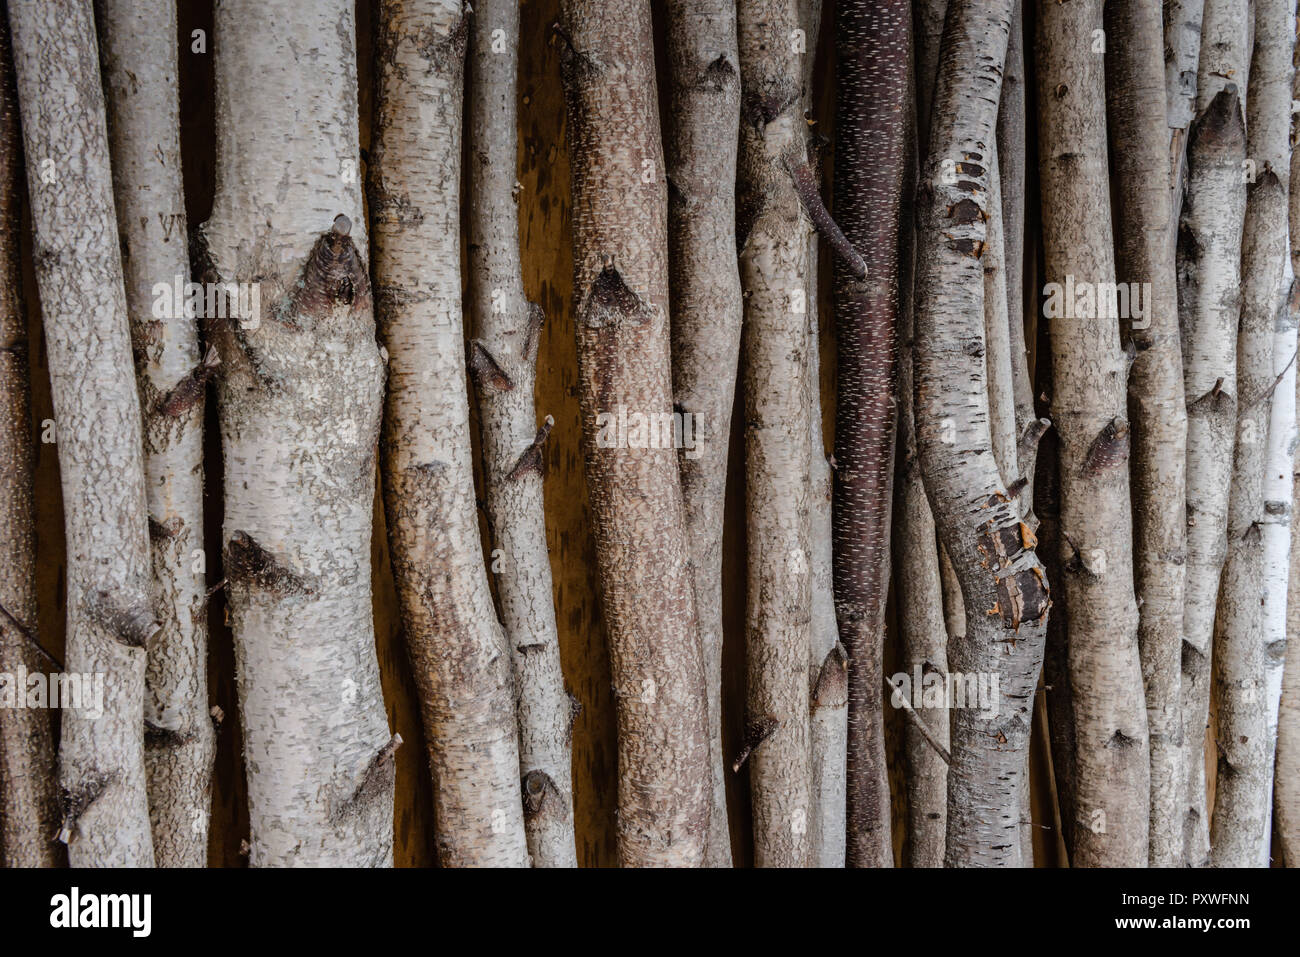 Horizontal view of birch tree trunks lining a wall. Stock Photo